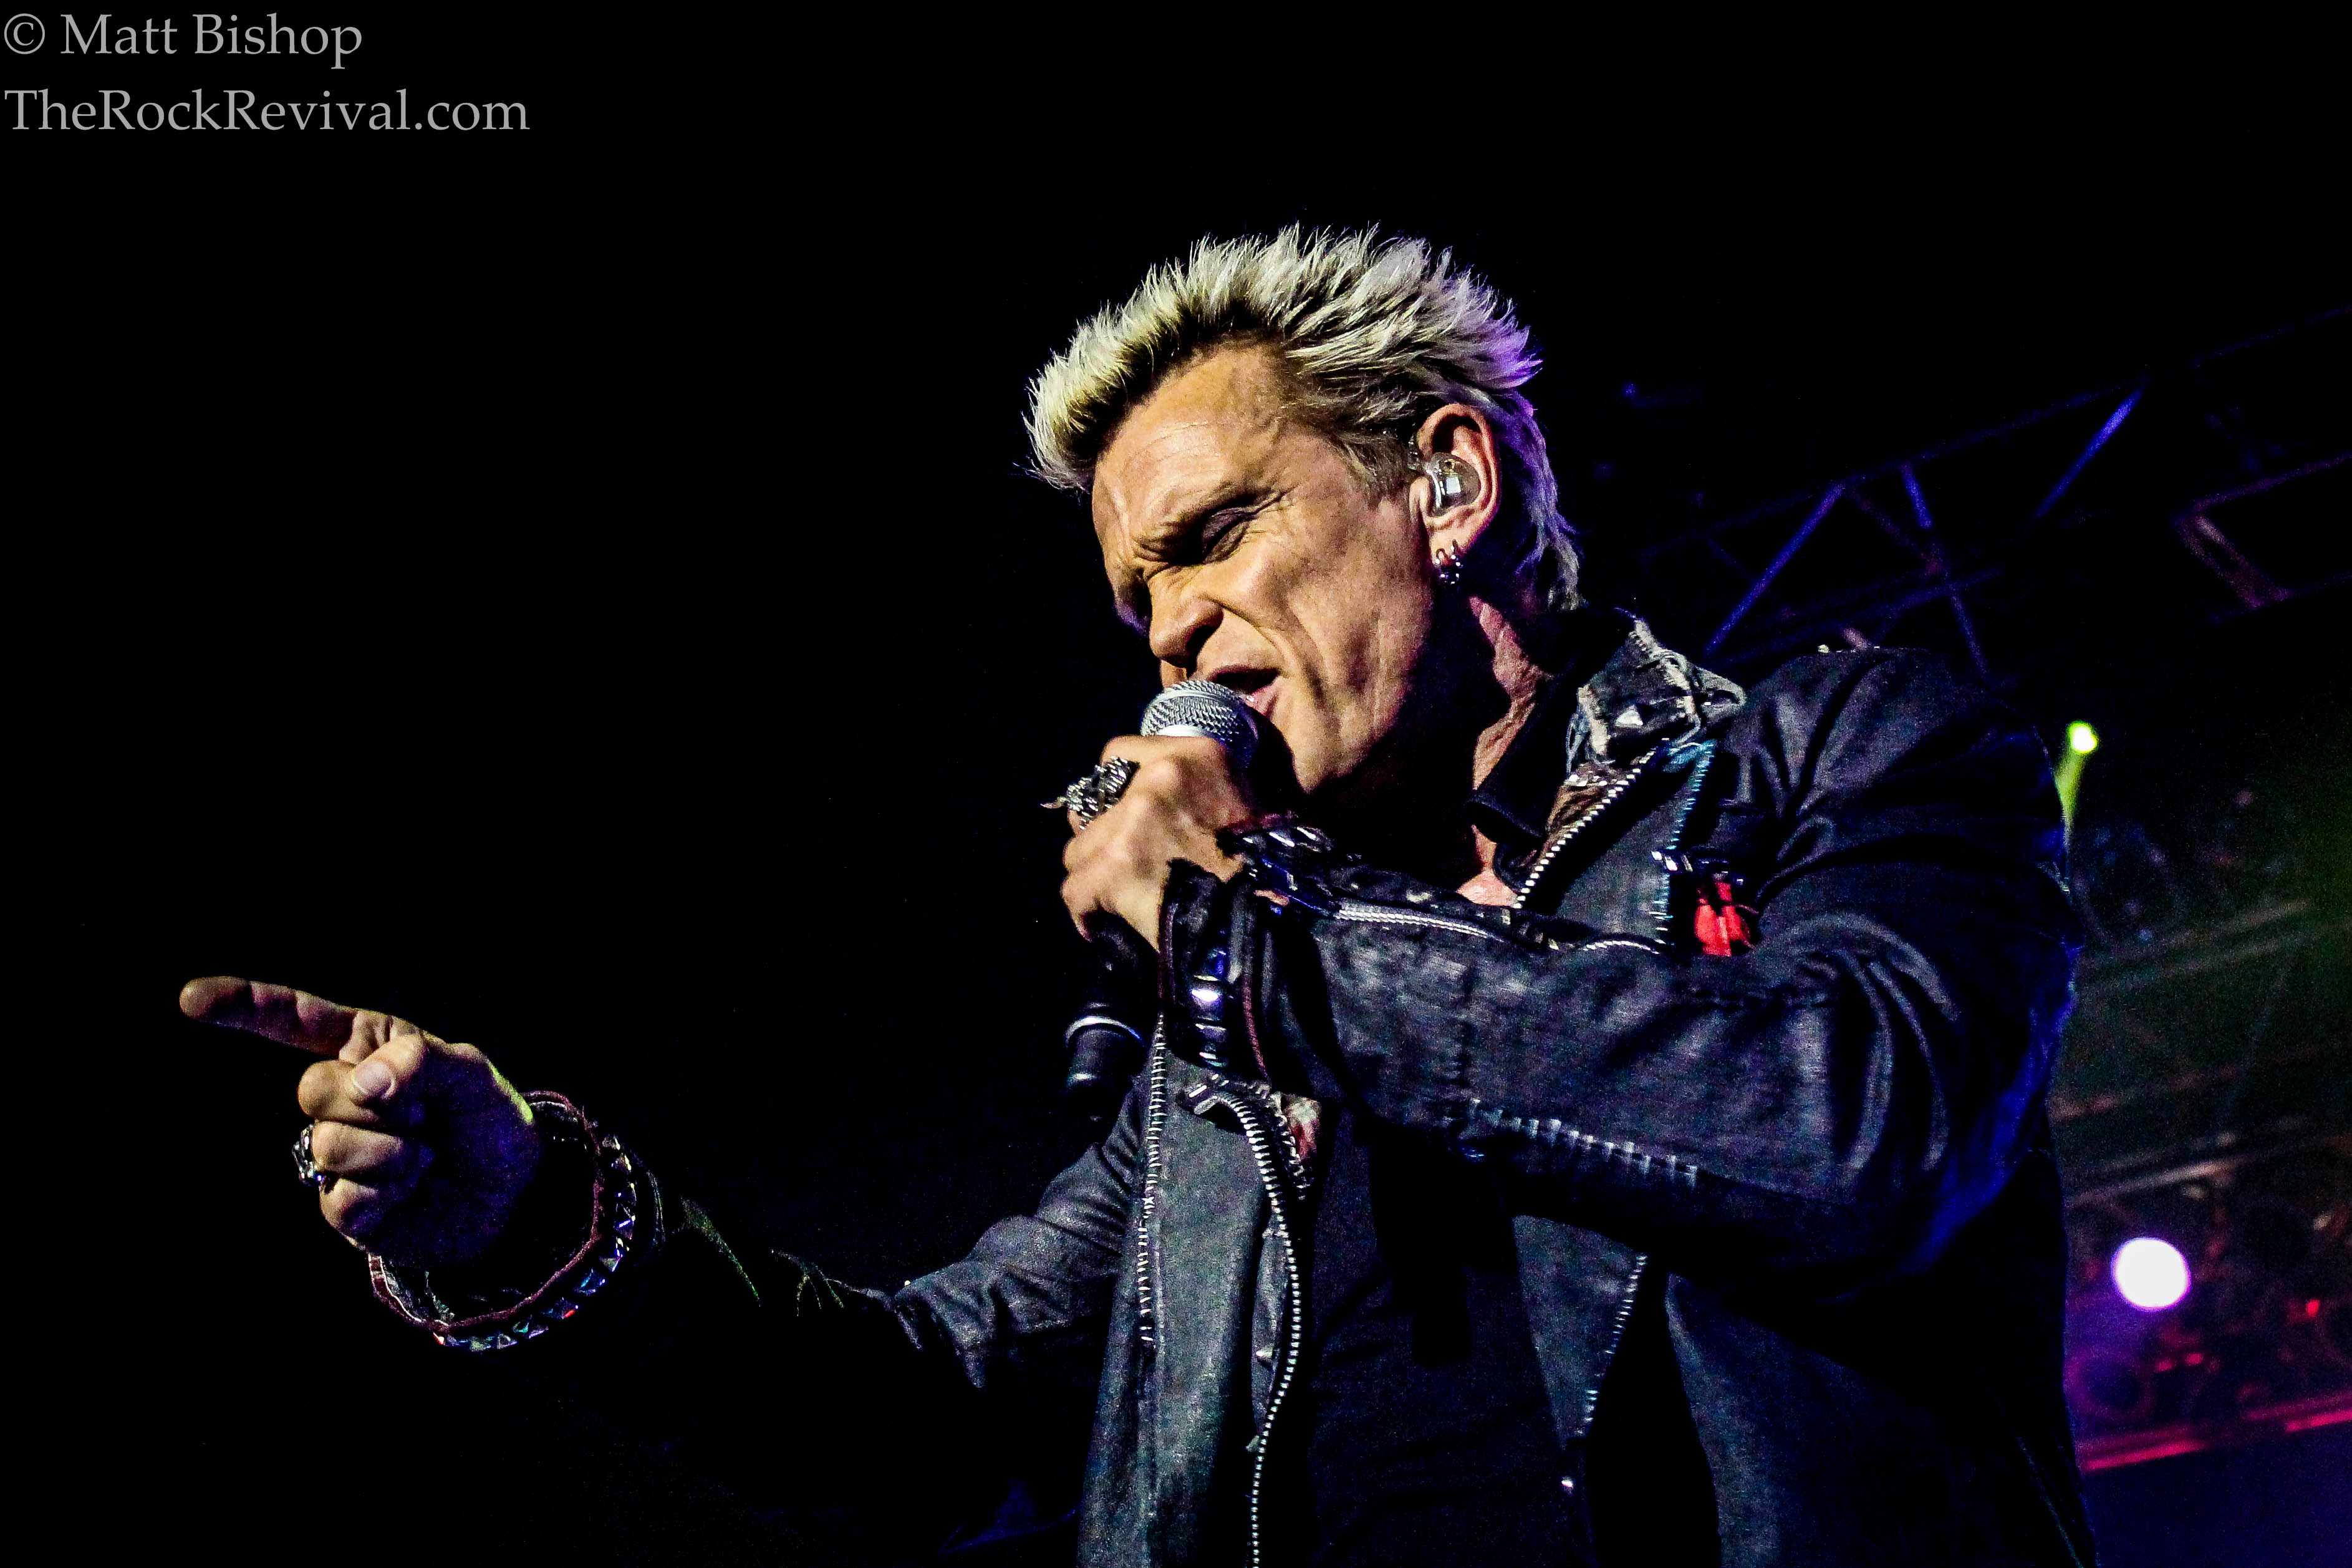 BILLY IDOL SET TO RELEASE NEW STUDIO ALBUM THIS FALL